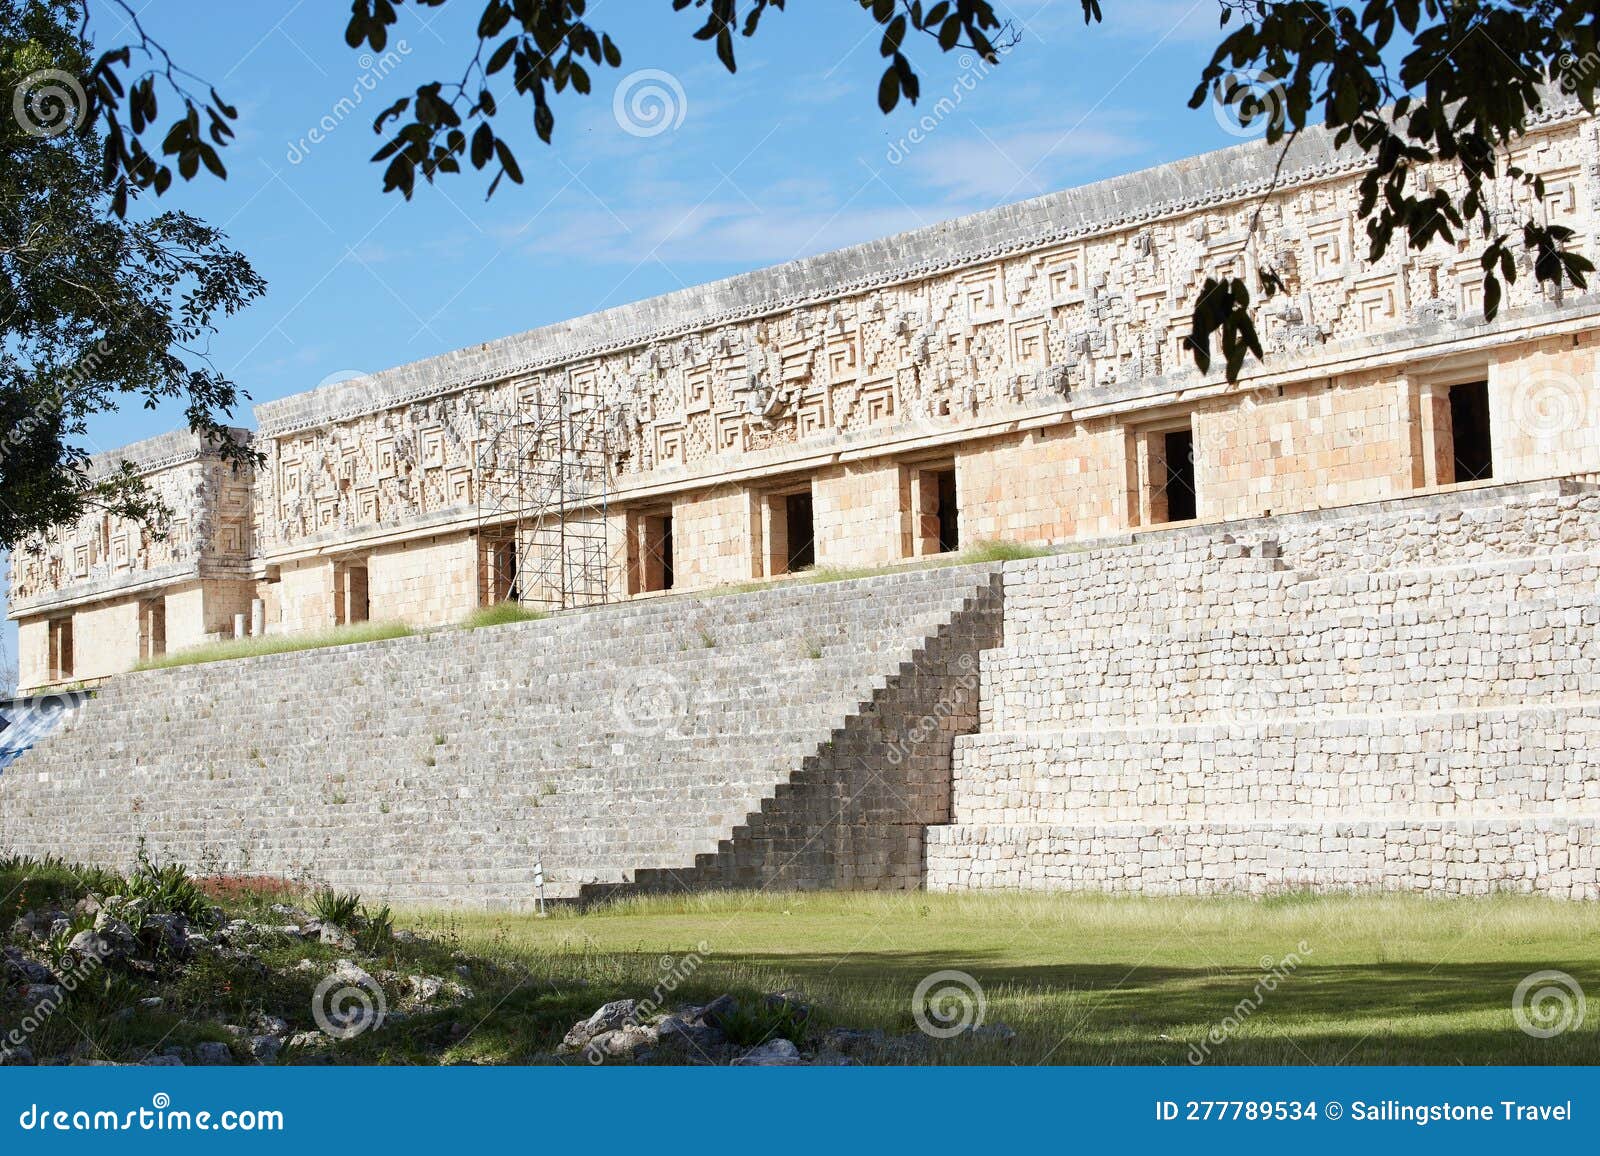 the mayan ruins of uxmal in yucatan, mexico, is one of mesoamerica's most stunning archaeological sites